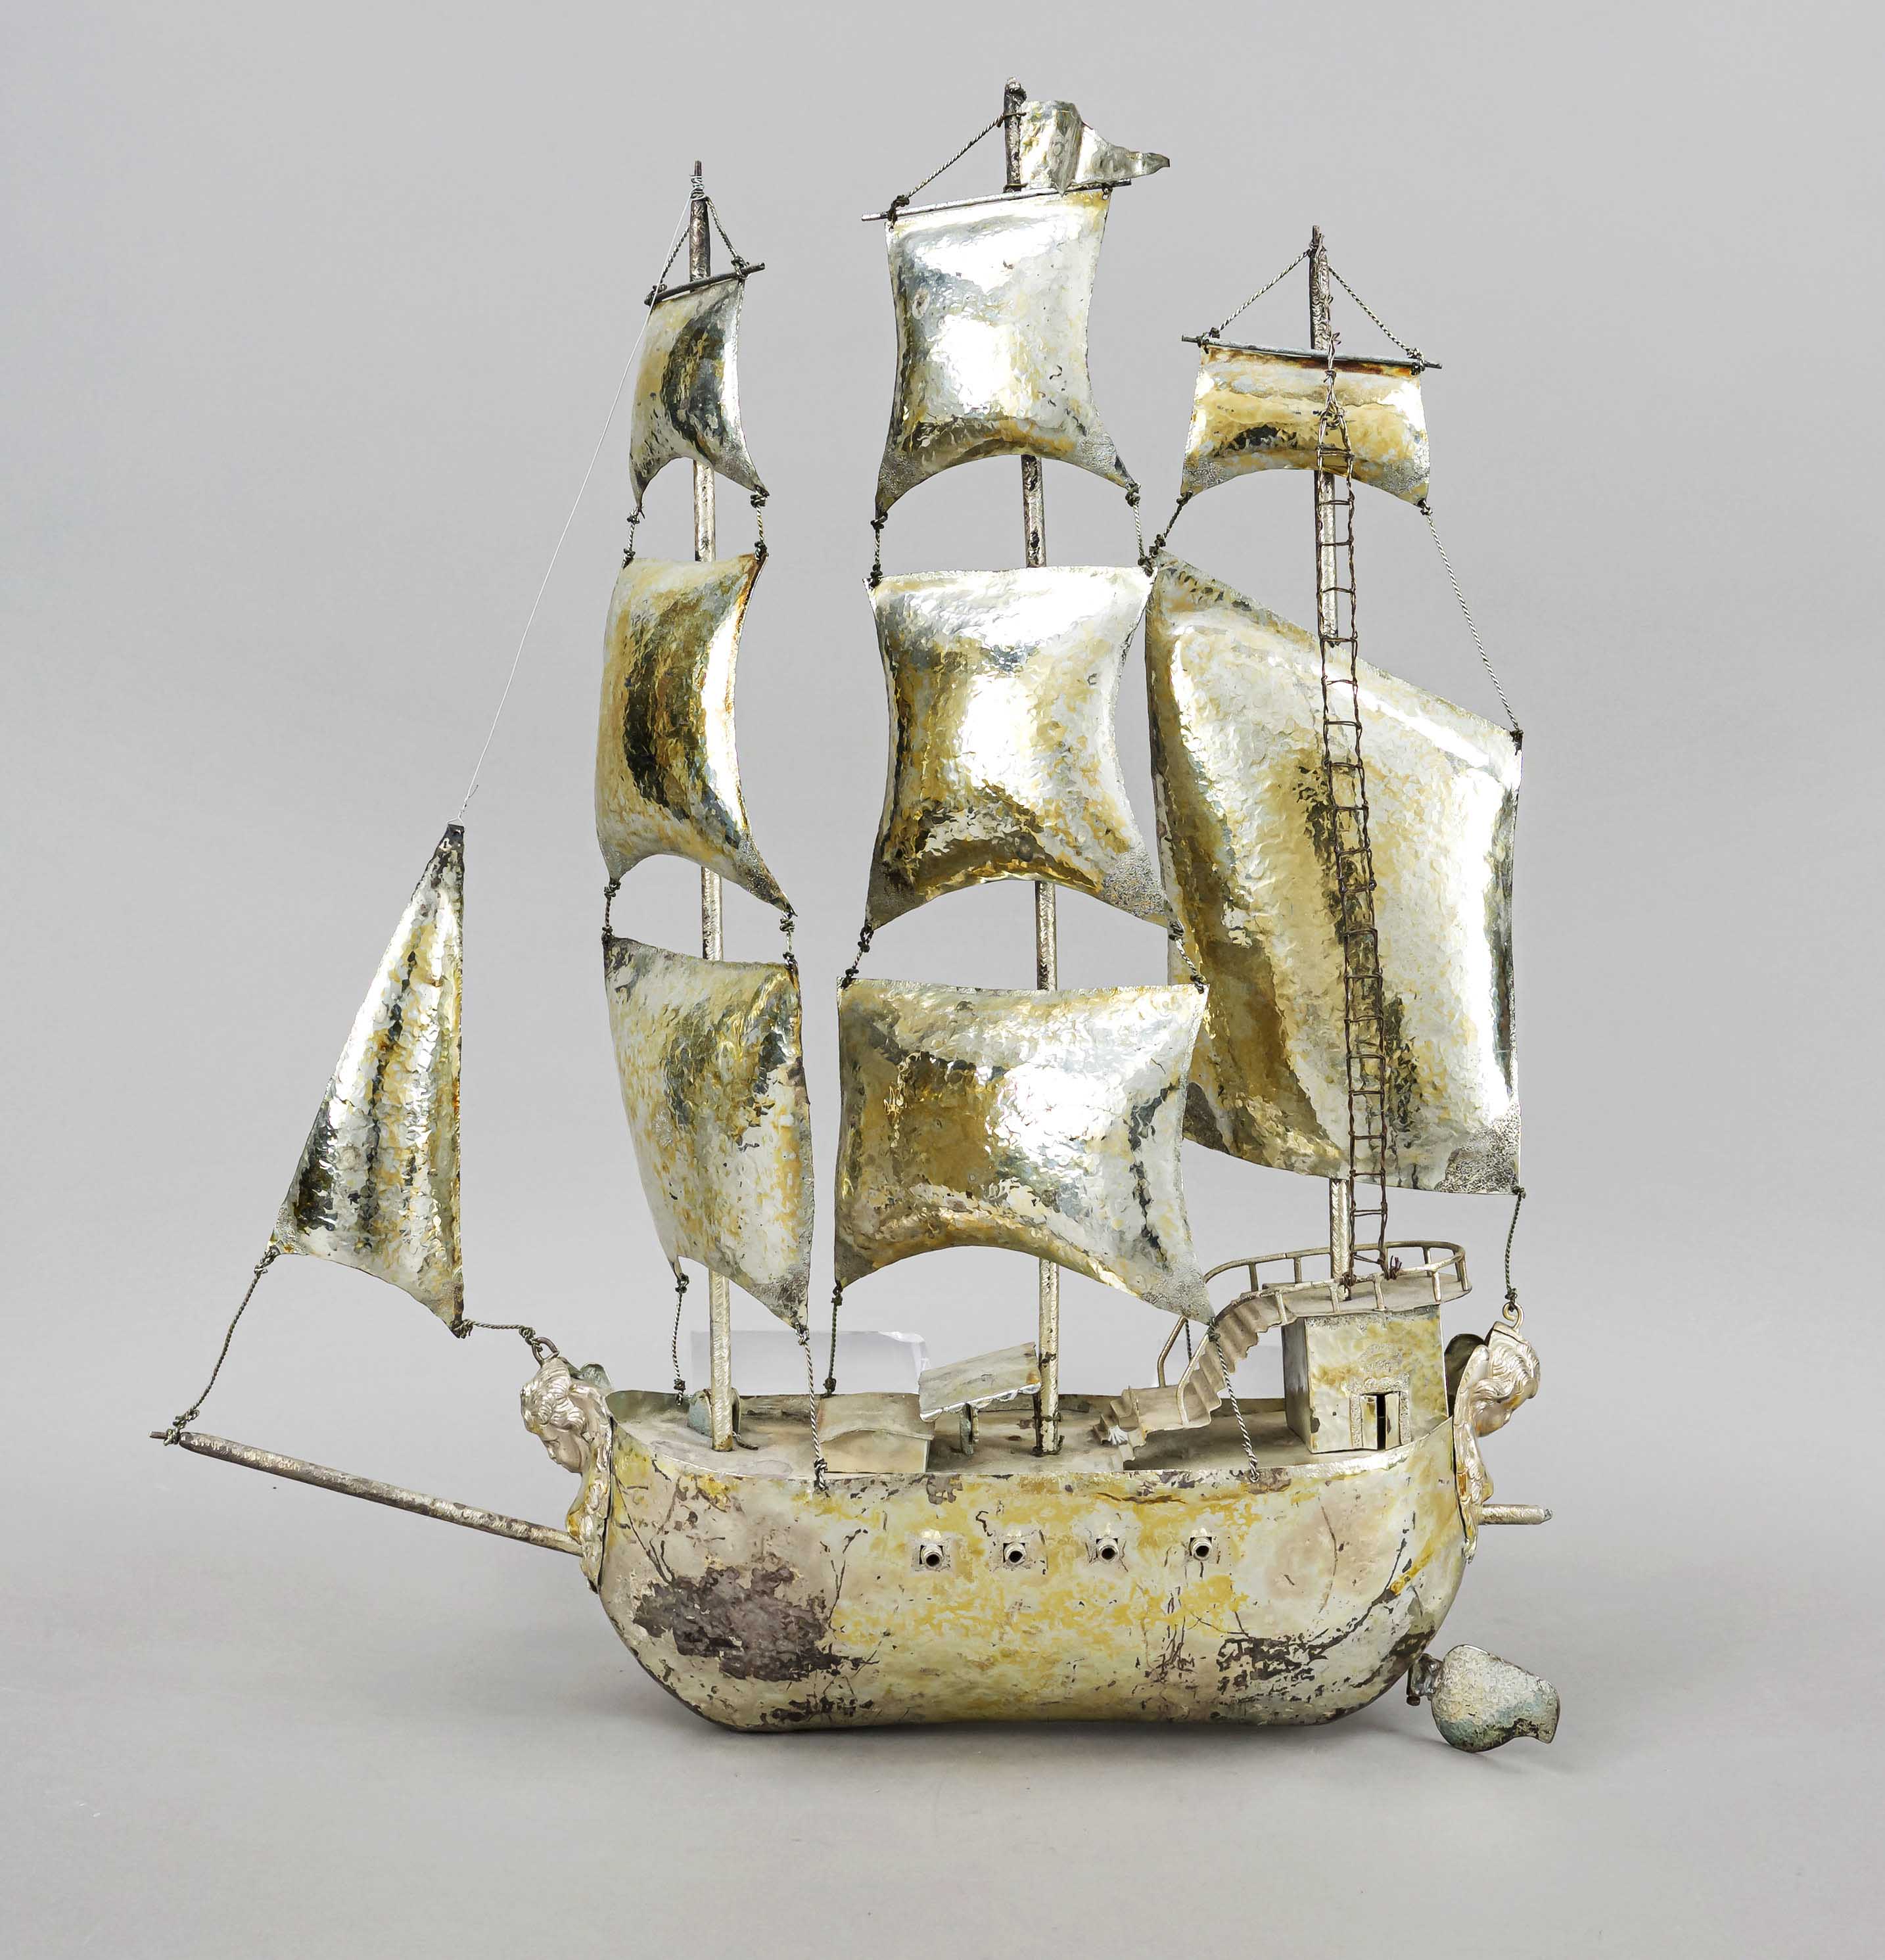 Sailing ship, probably Chinese import marks, hallmarked silver, three-master in full sail, h. 50 cm,